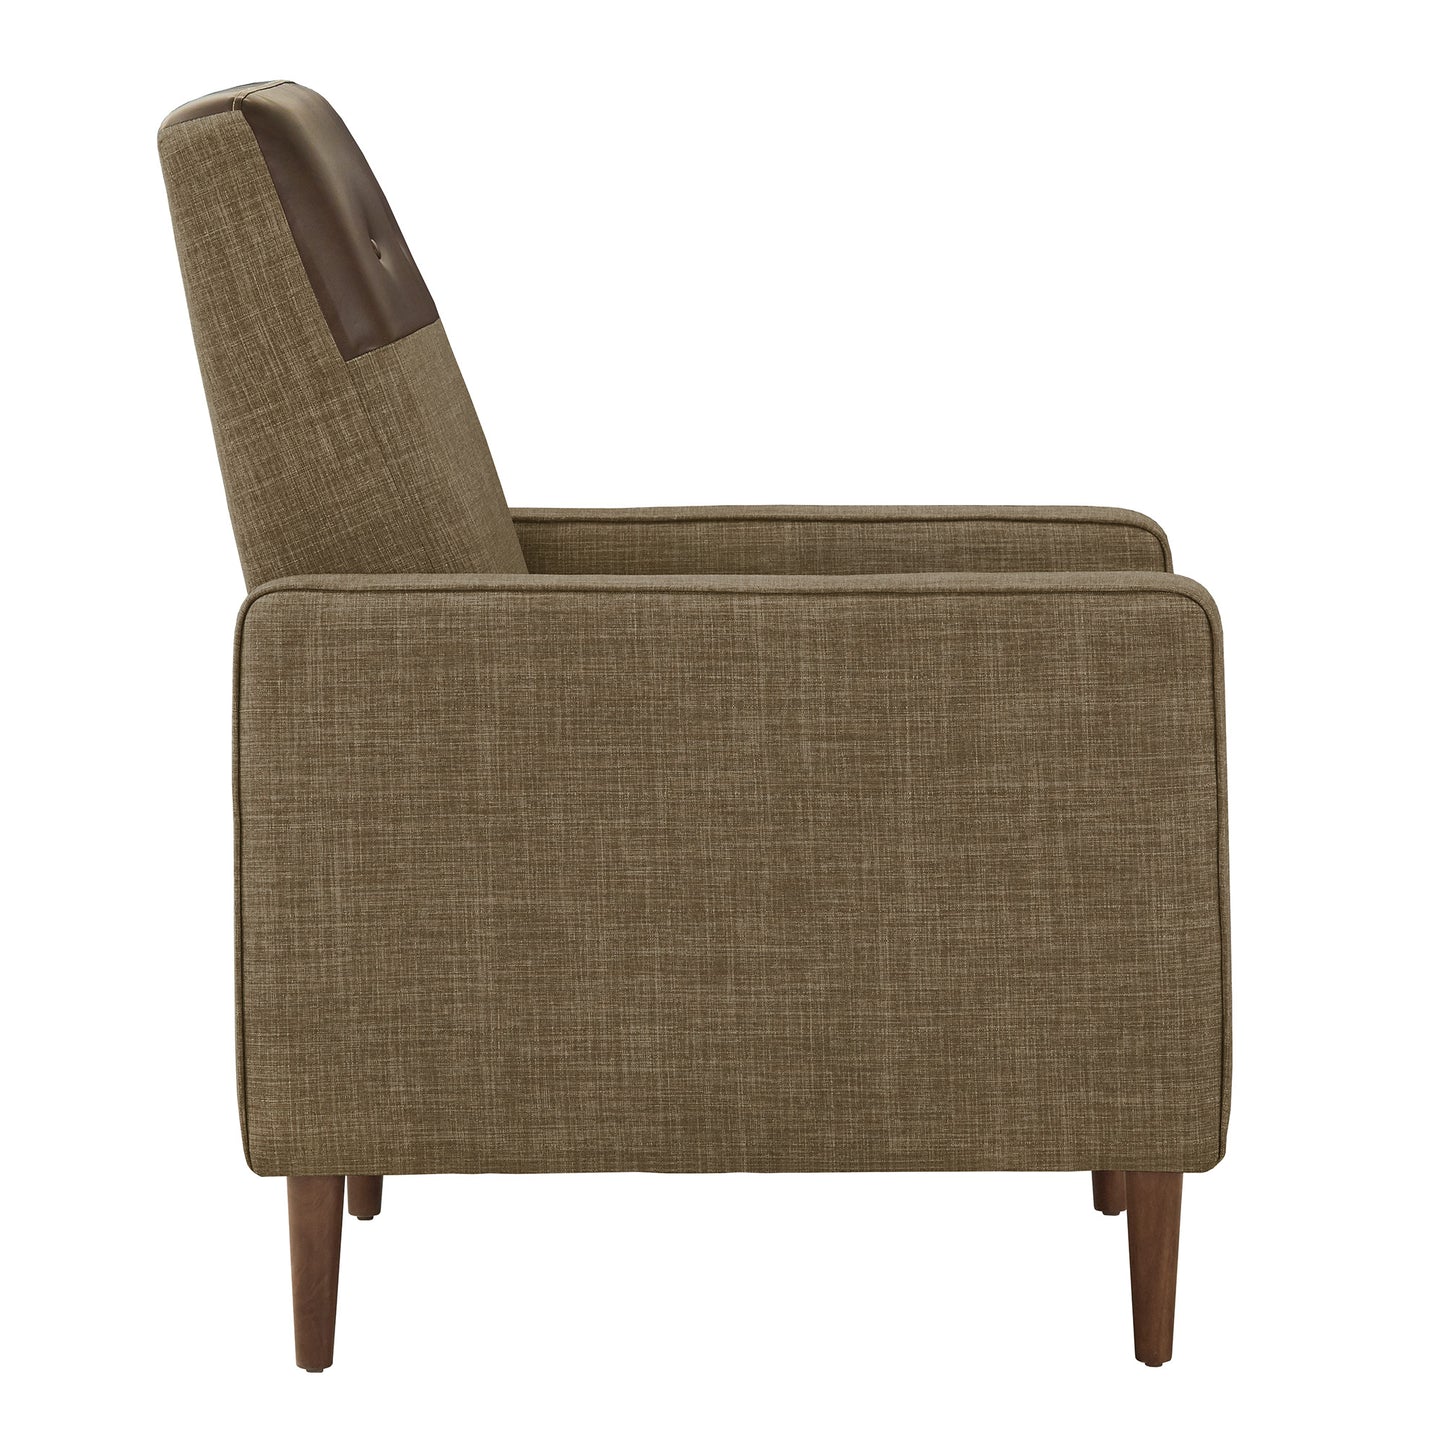 Push-Back Recliner - Brown with Light Brown Linen